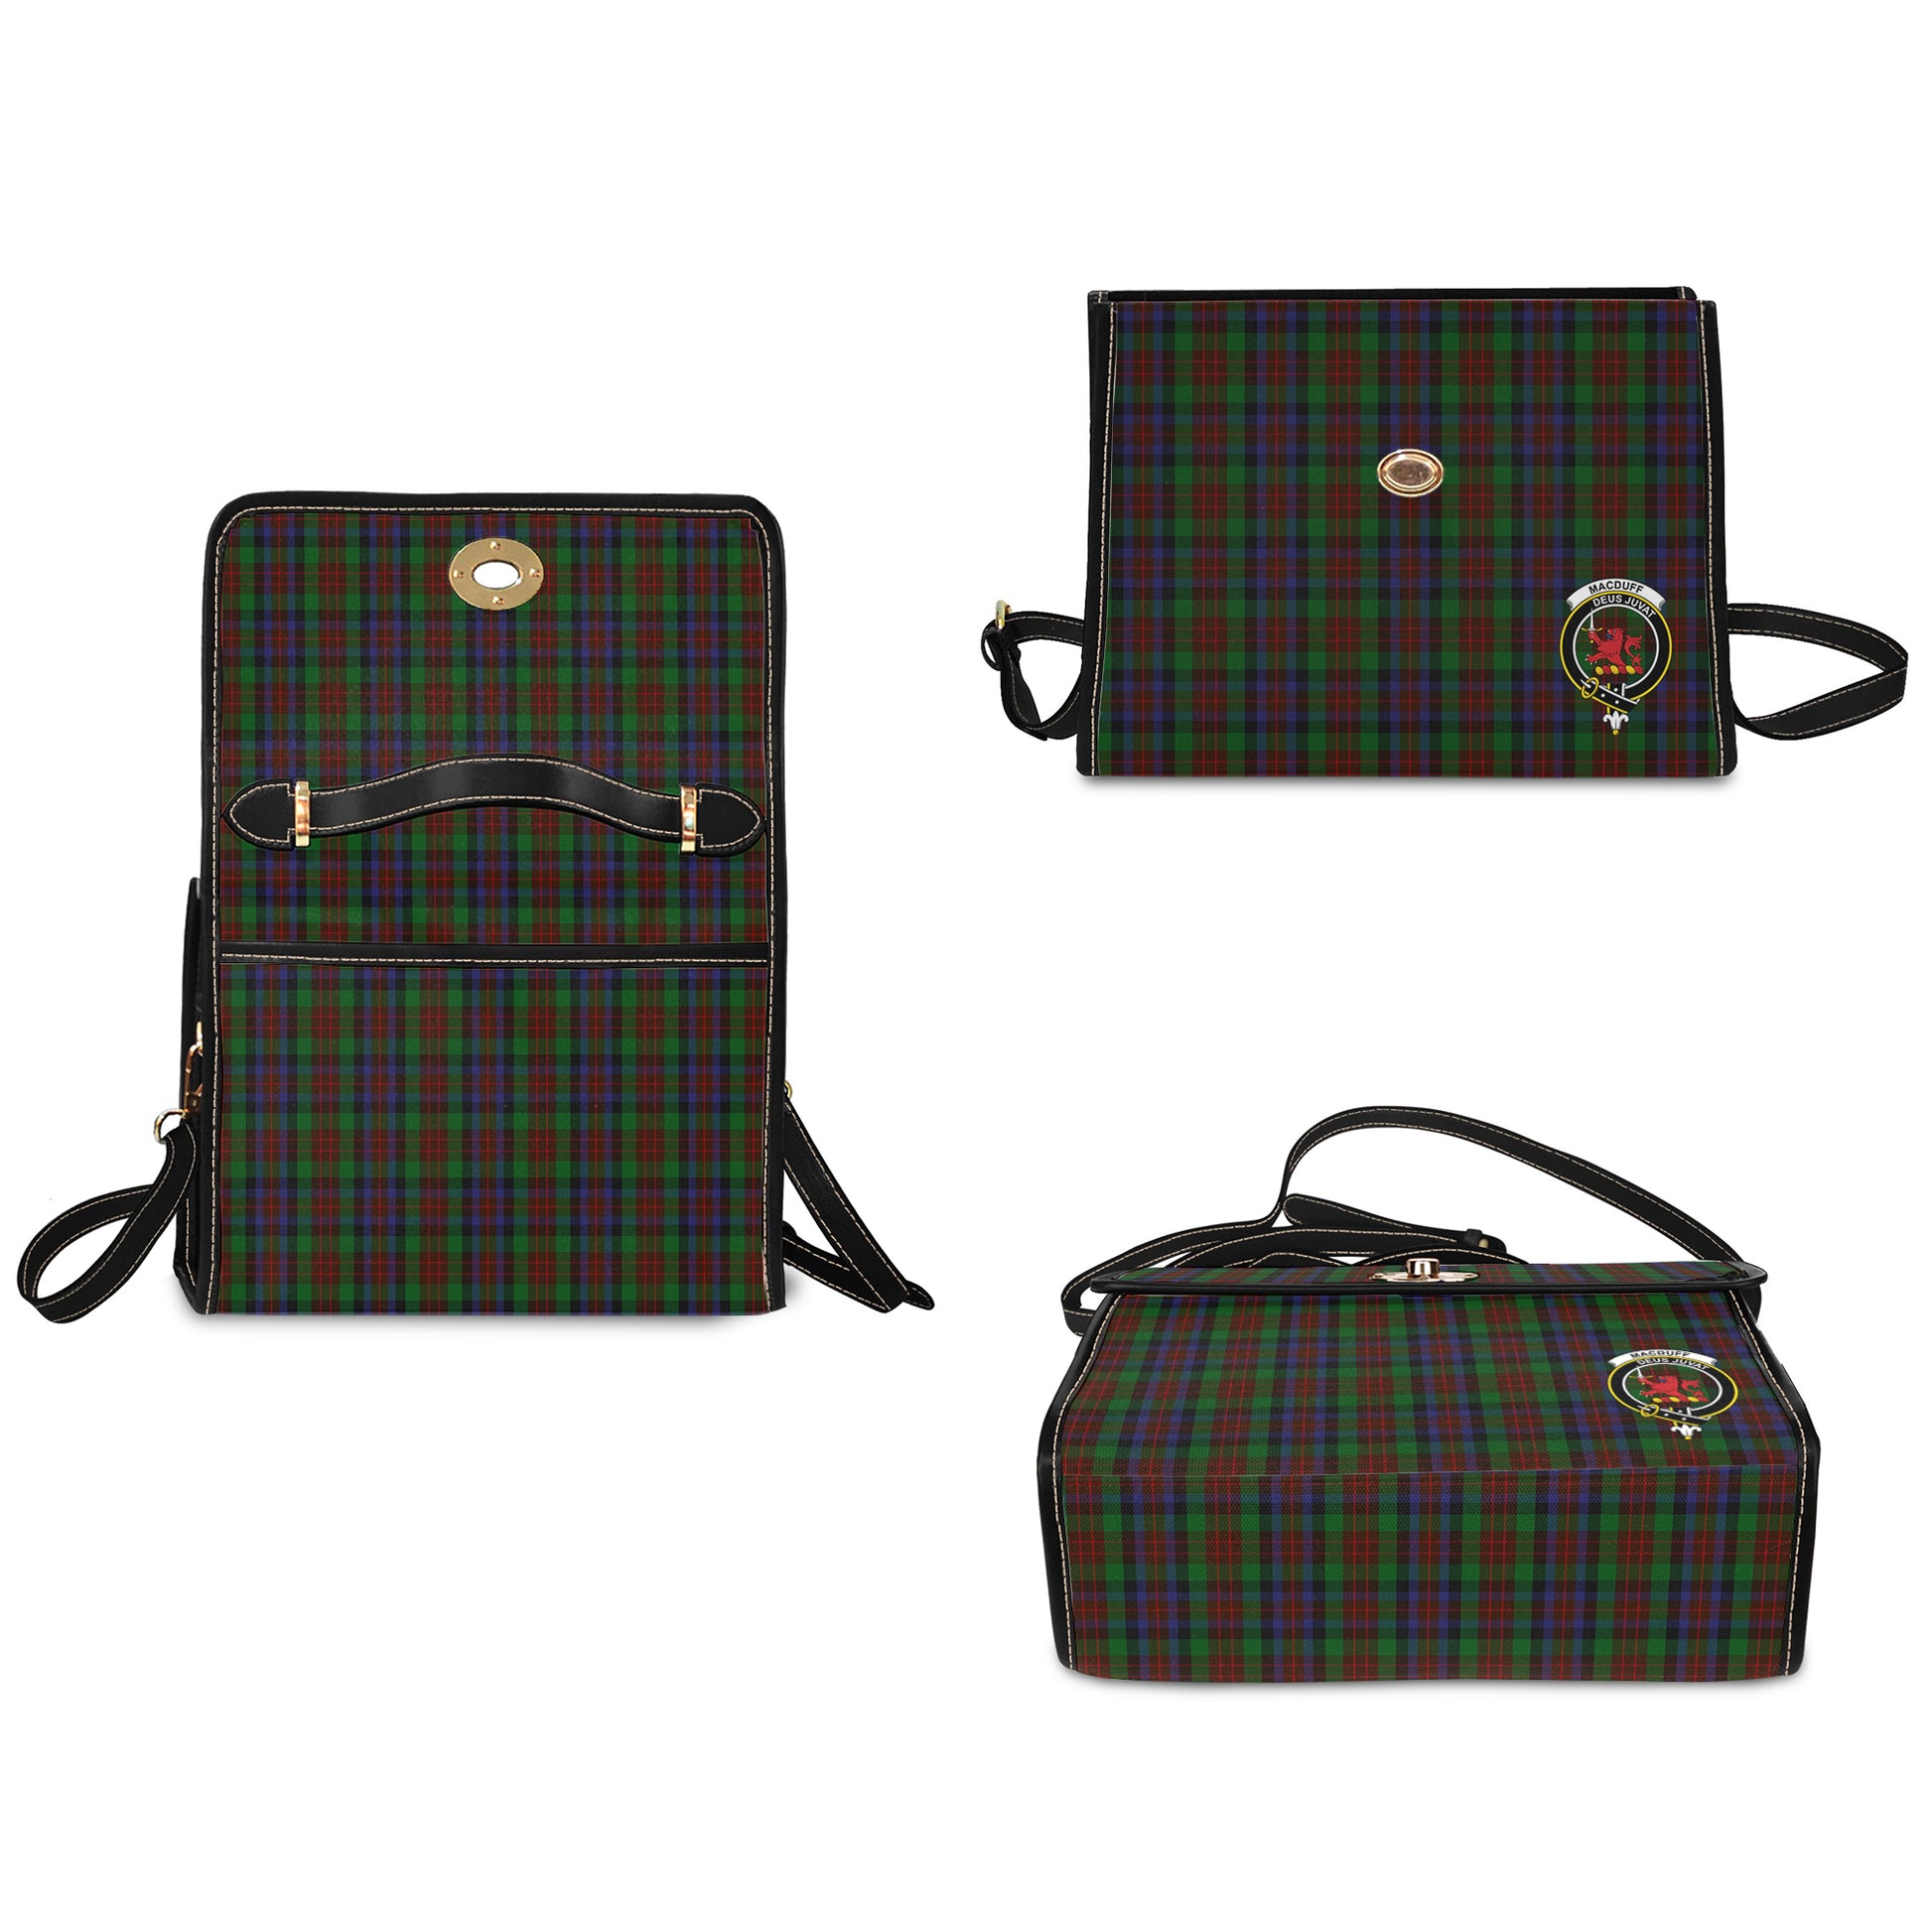 macduff-hunting-tartan-leather-strap-waterproof-canvas-bag-with-family-crest